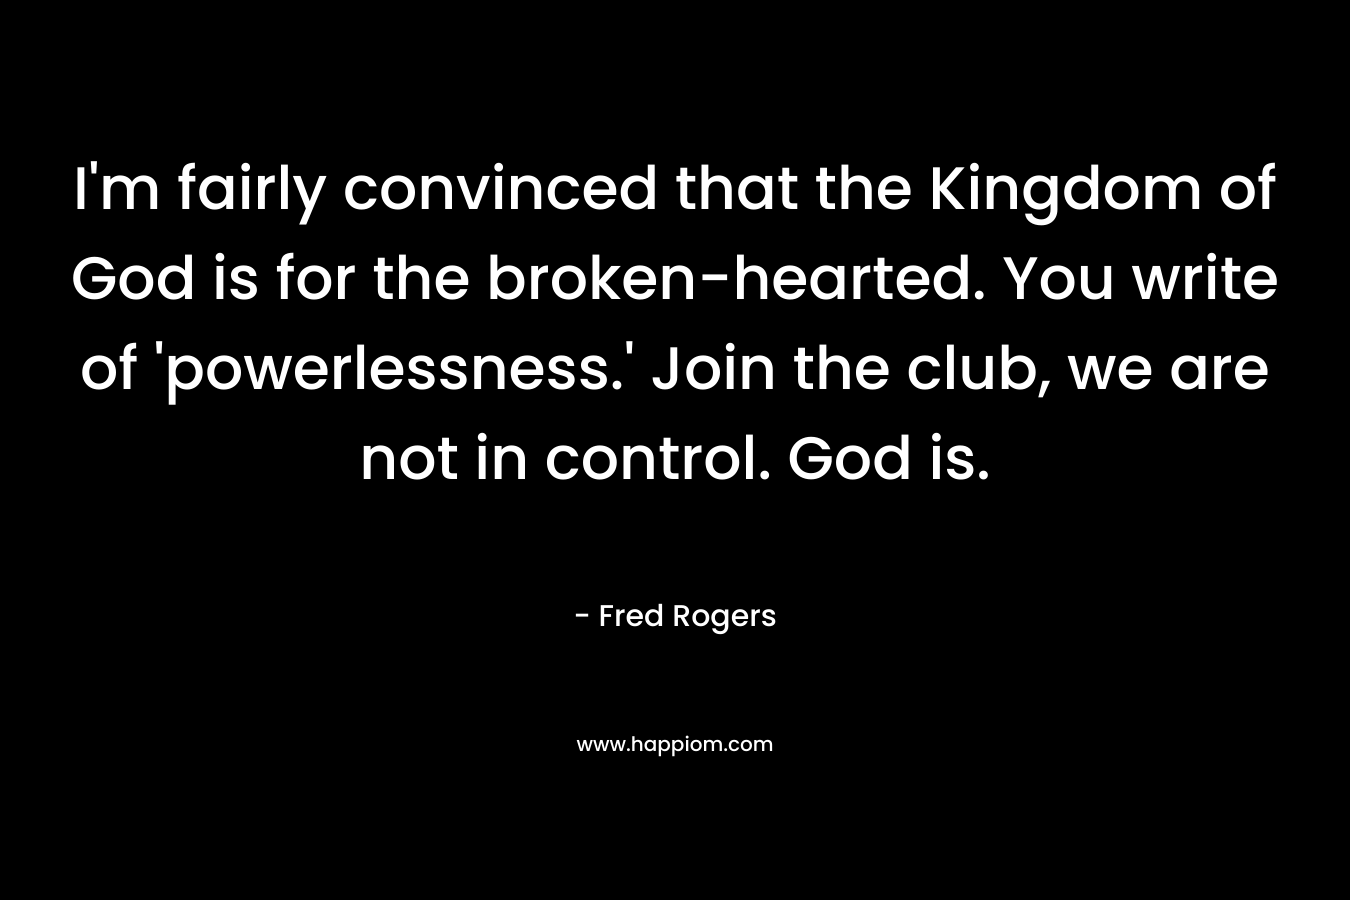 I’m fairly convinced that the Kingdom of God is for the broken-hearted. You write of ‘powerlessness.’ Join the club, we are not in control. God is. – Fred Rogers